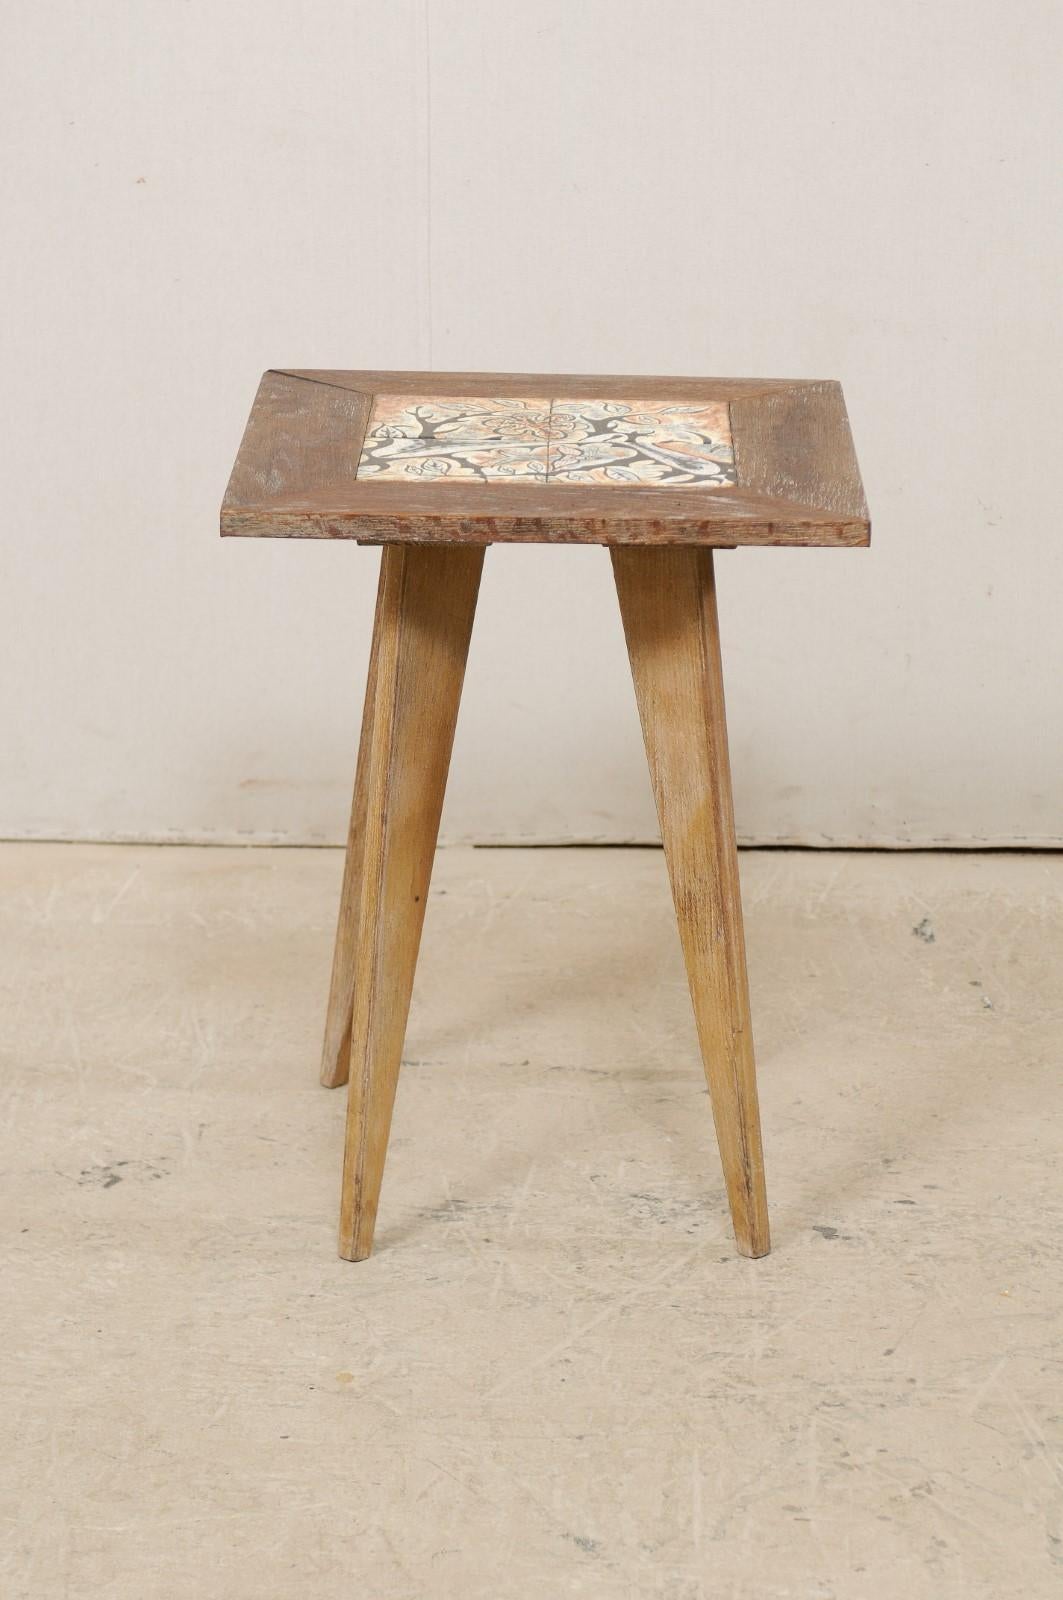 Midcentury Side Table with Painted Tile Top Attributed to Anton Refreiger 2